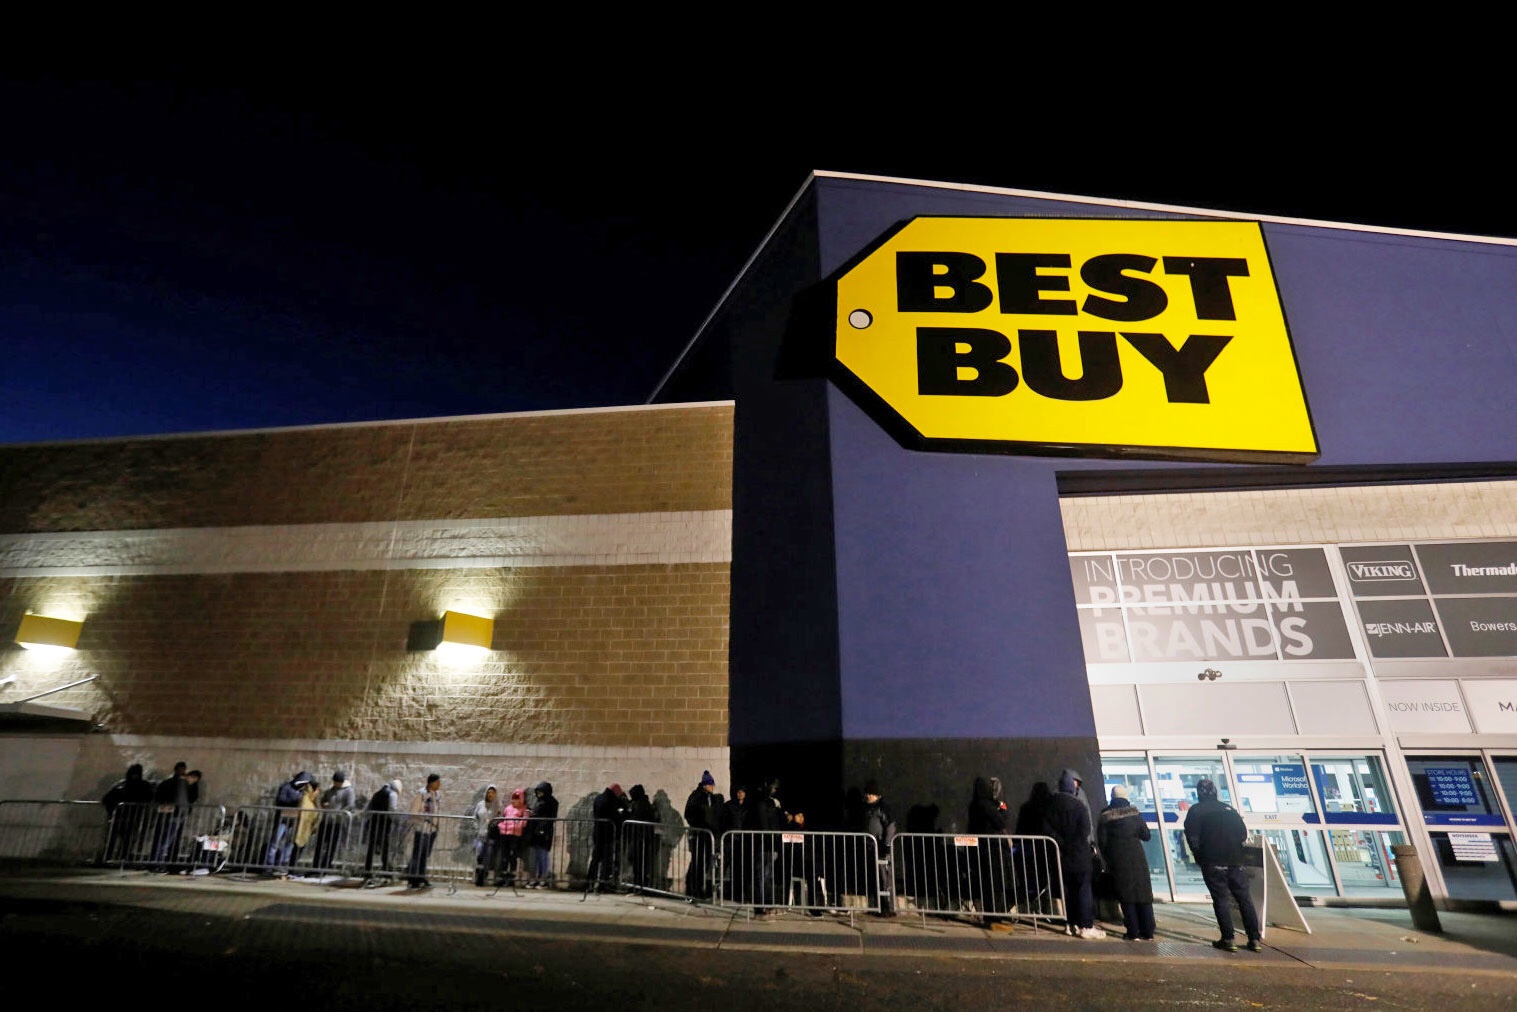 Best Buy customer data may also have been exposed